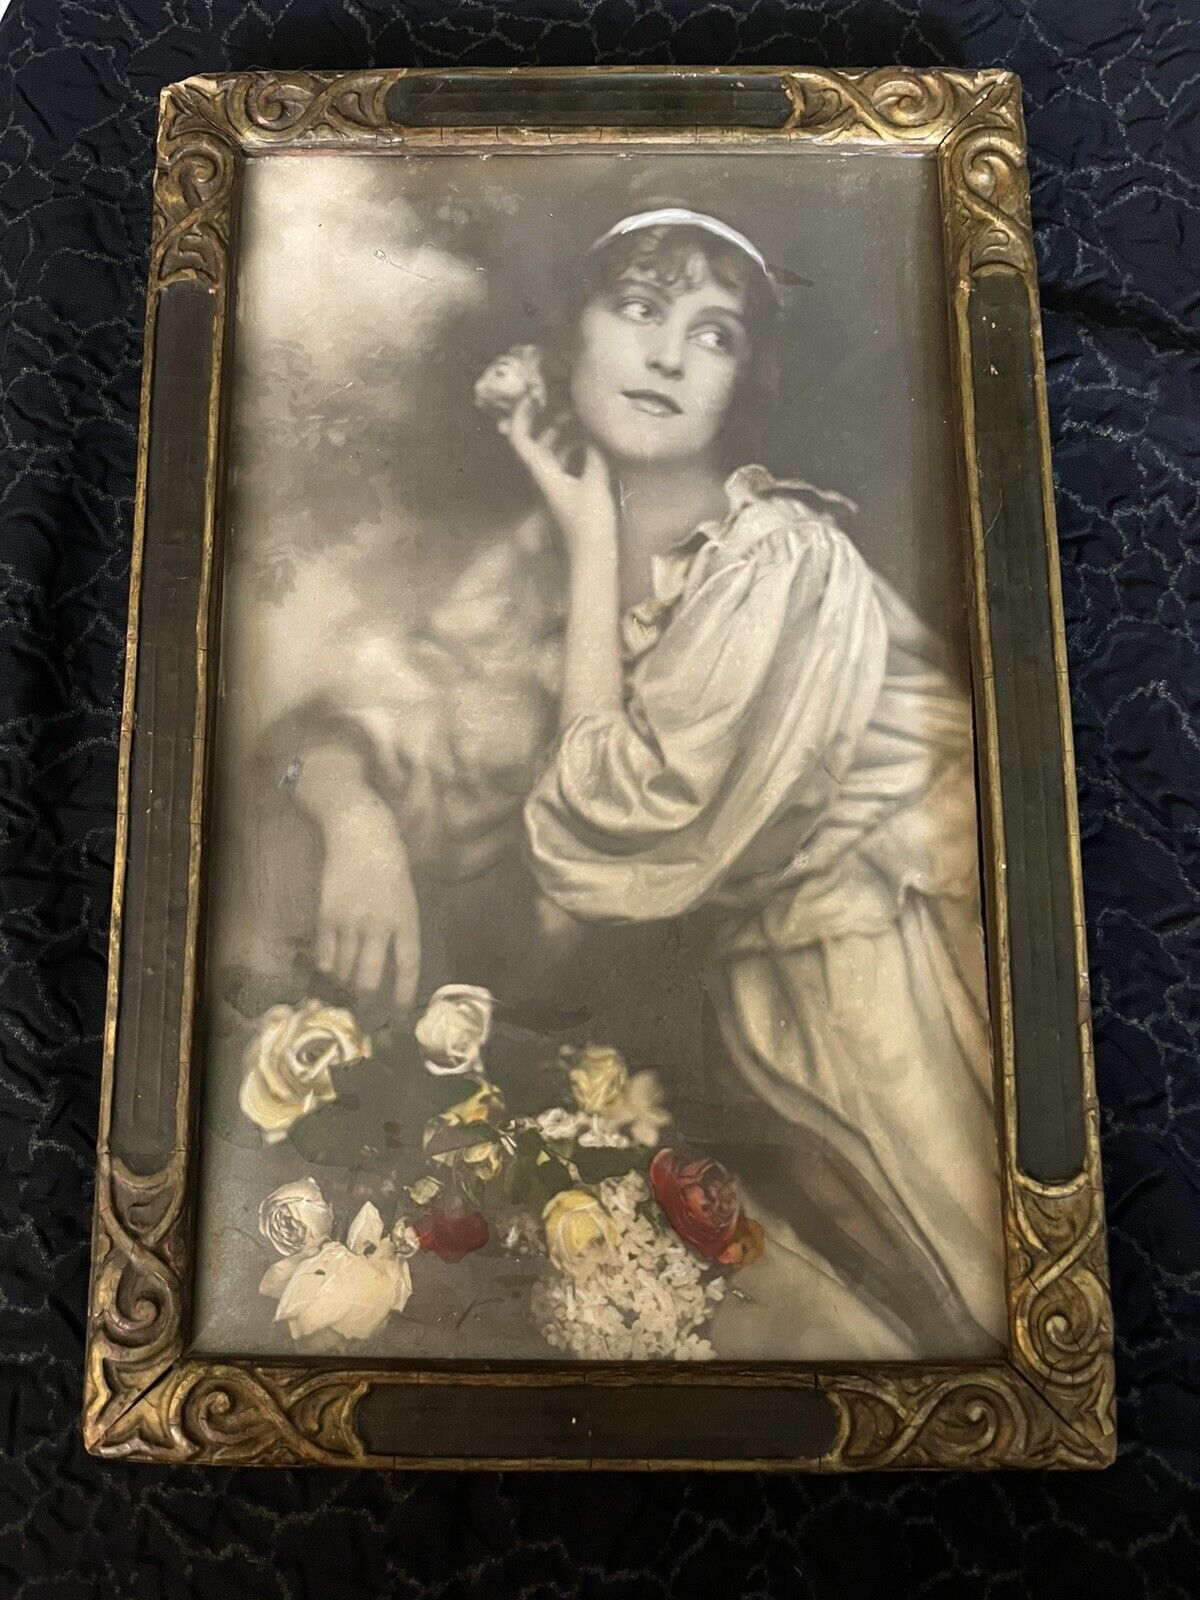 Antique Art Deco Glamour Colorized Photo in Wood Gesso Frame 8”x 12” no Glass